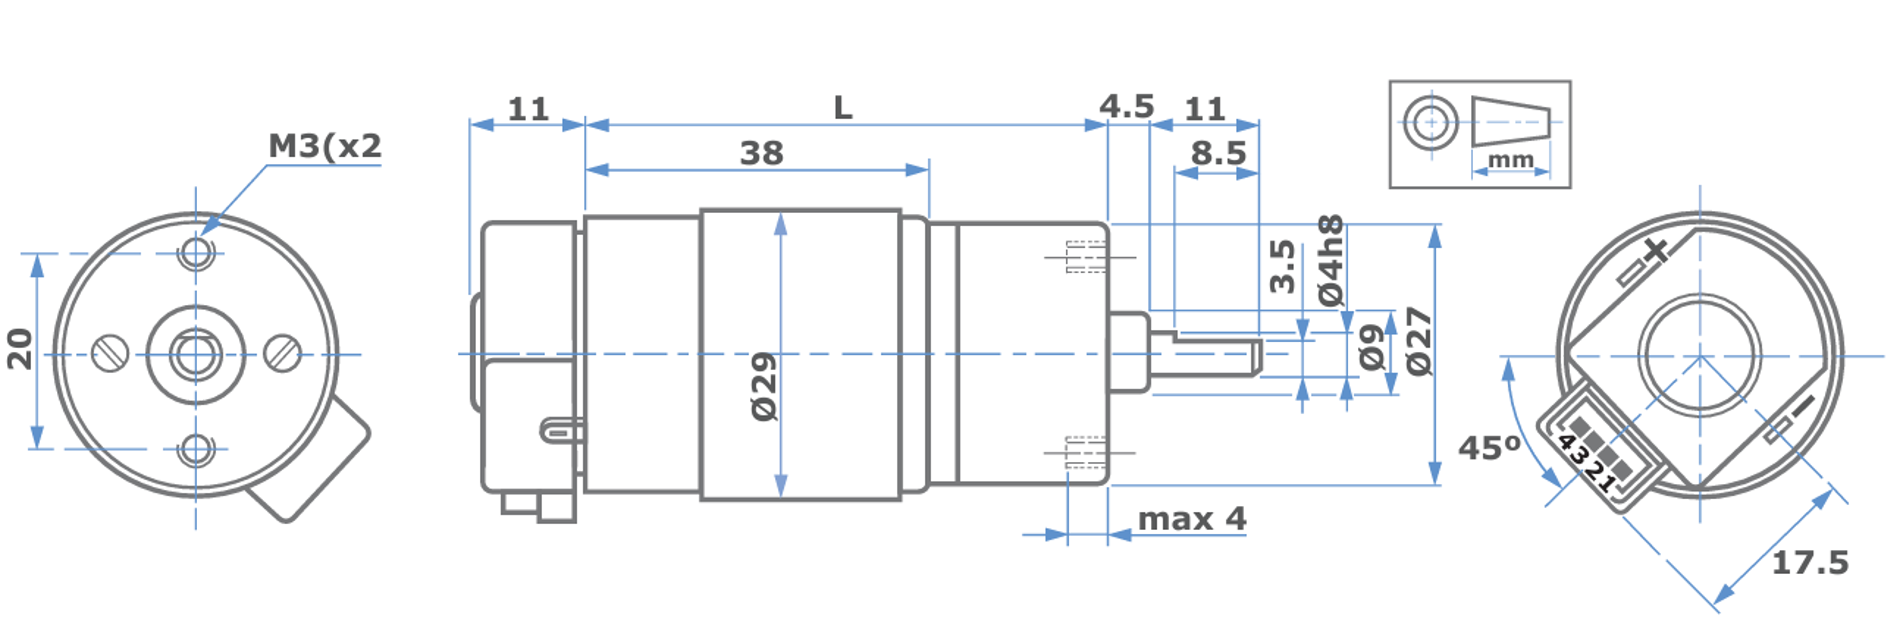 Sample Motor Drawing with tolerance.